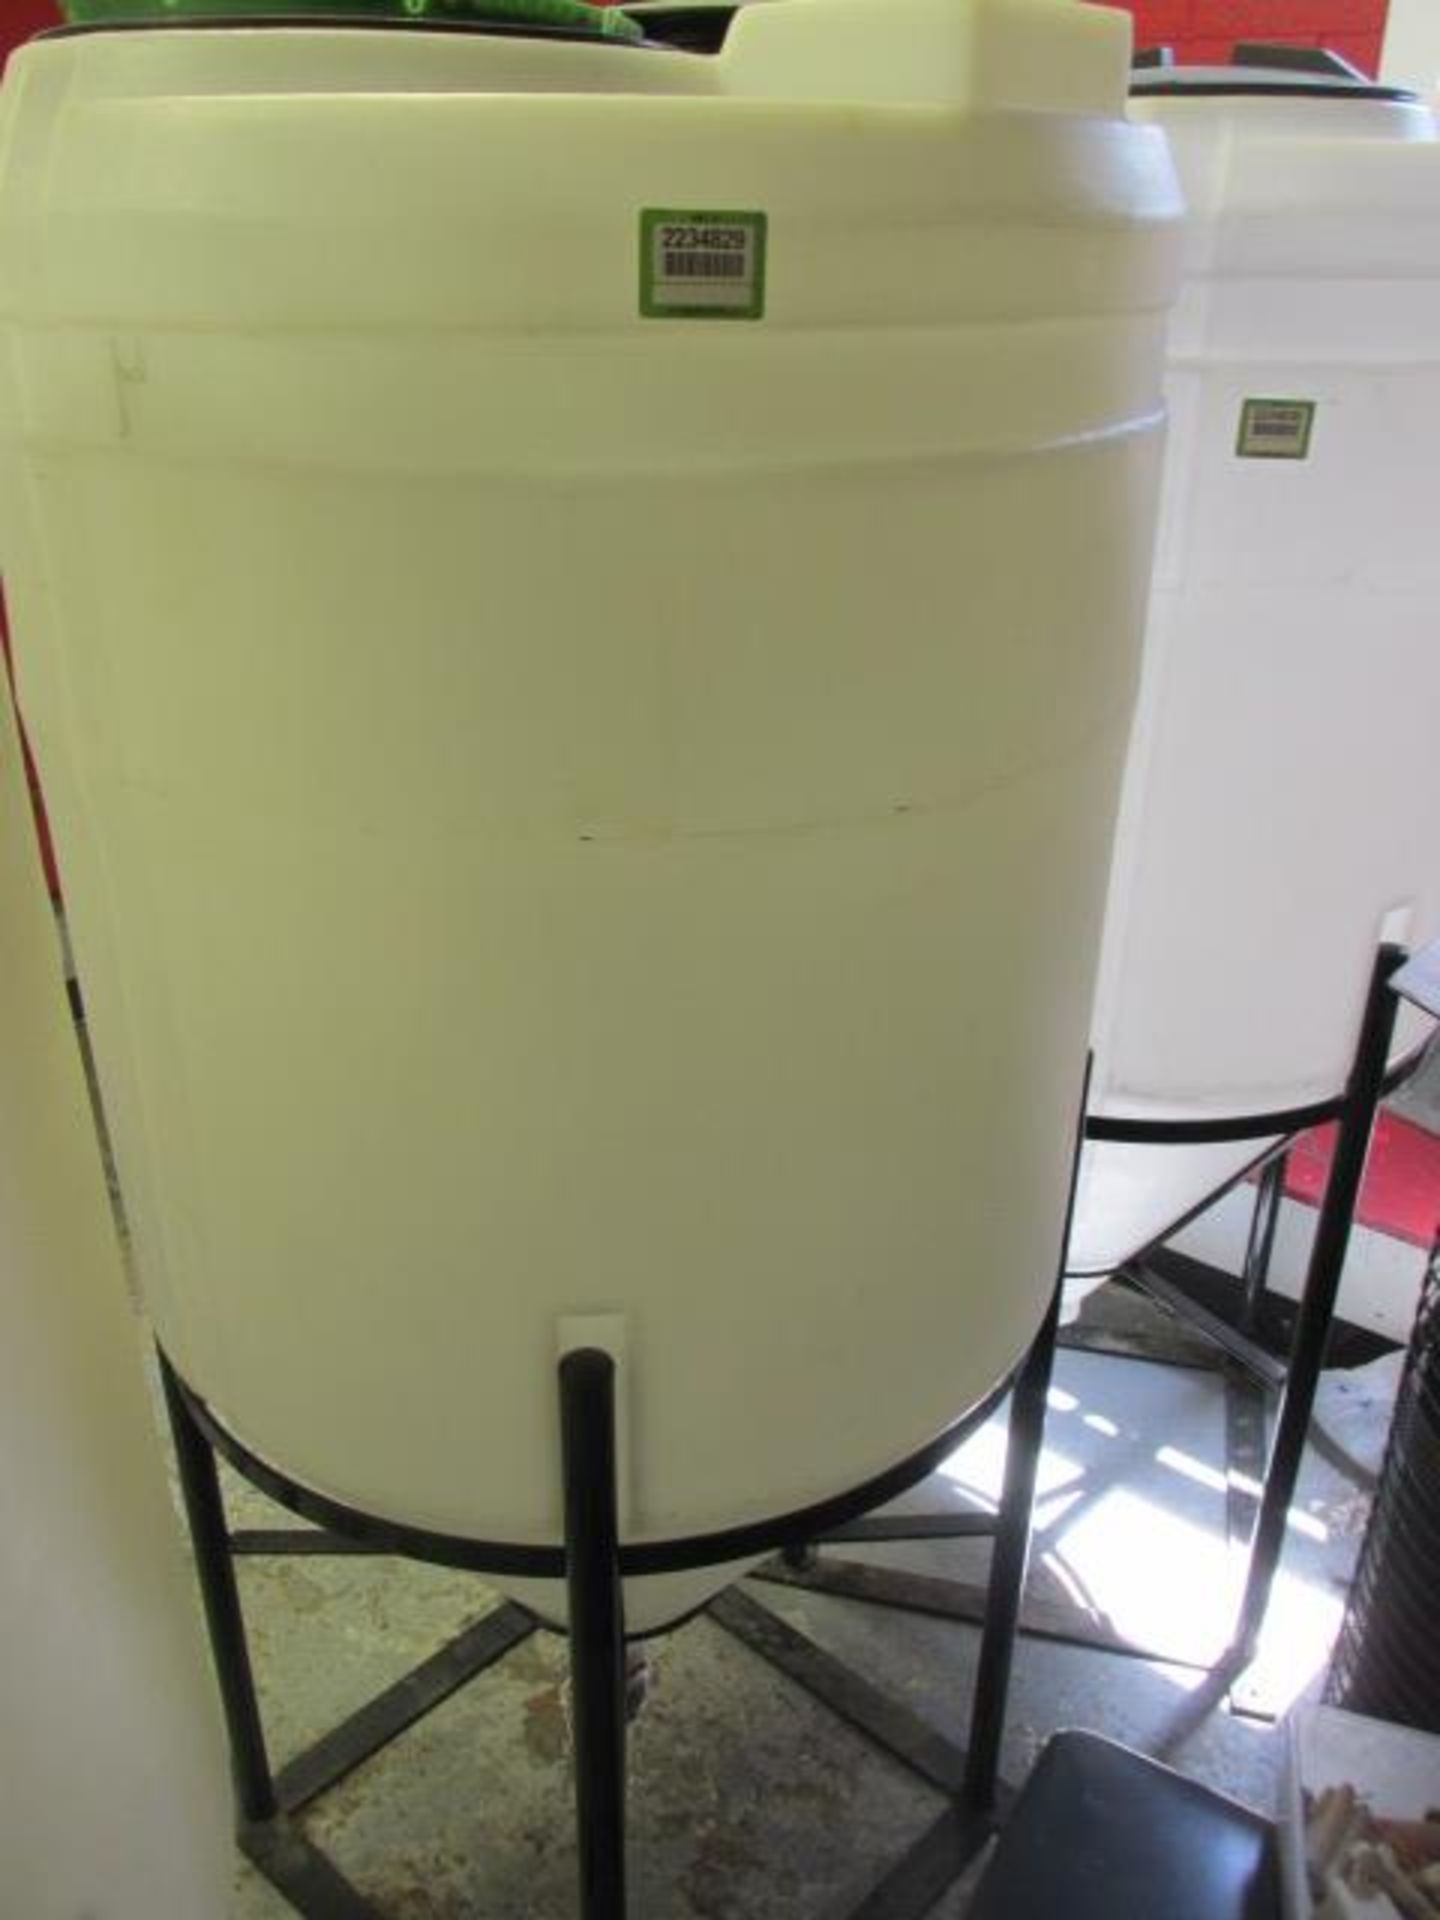 Poly Tank, 3BBL Fermenter Tank, 90 Gal. HIT# 2234829. Loc: Brewery Prep Room. Asset Located at 143